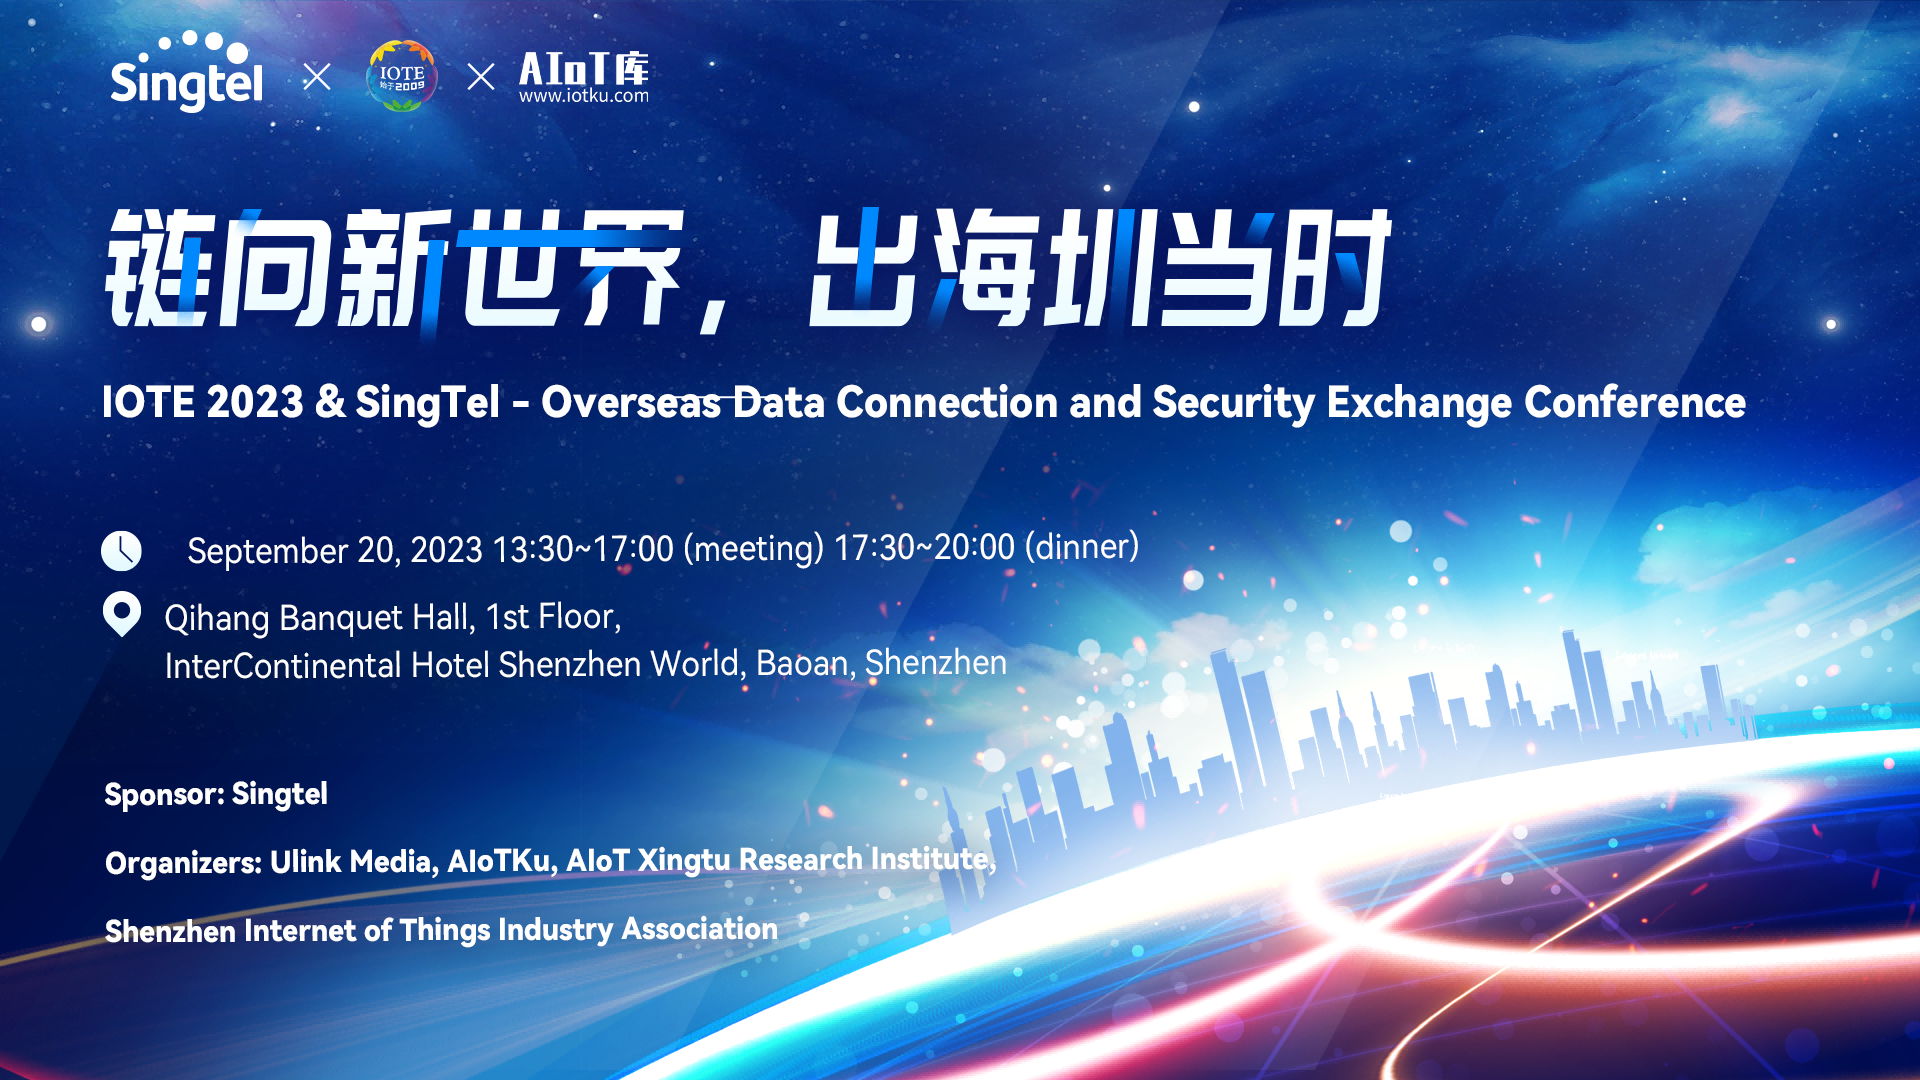 IOTE forum | IOTE2023 & SingTel - Overseas Data Connection and Security Exchange Conference (IOTE-IoT Expo China)